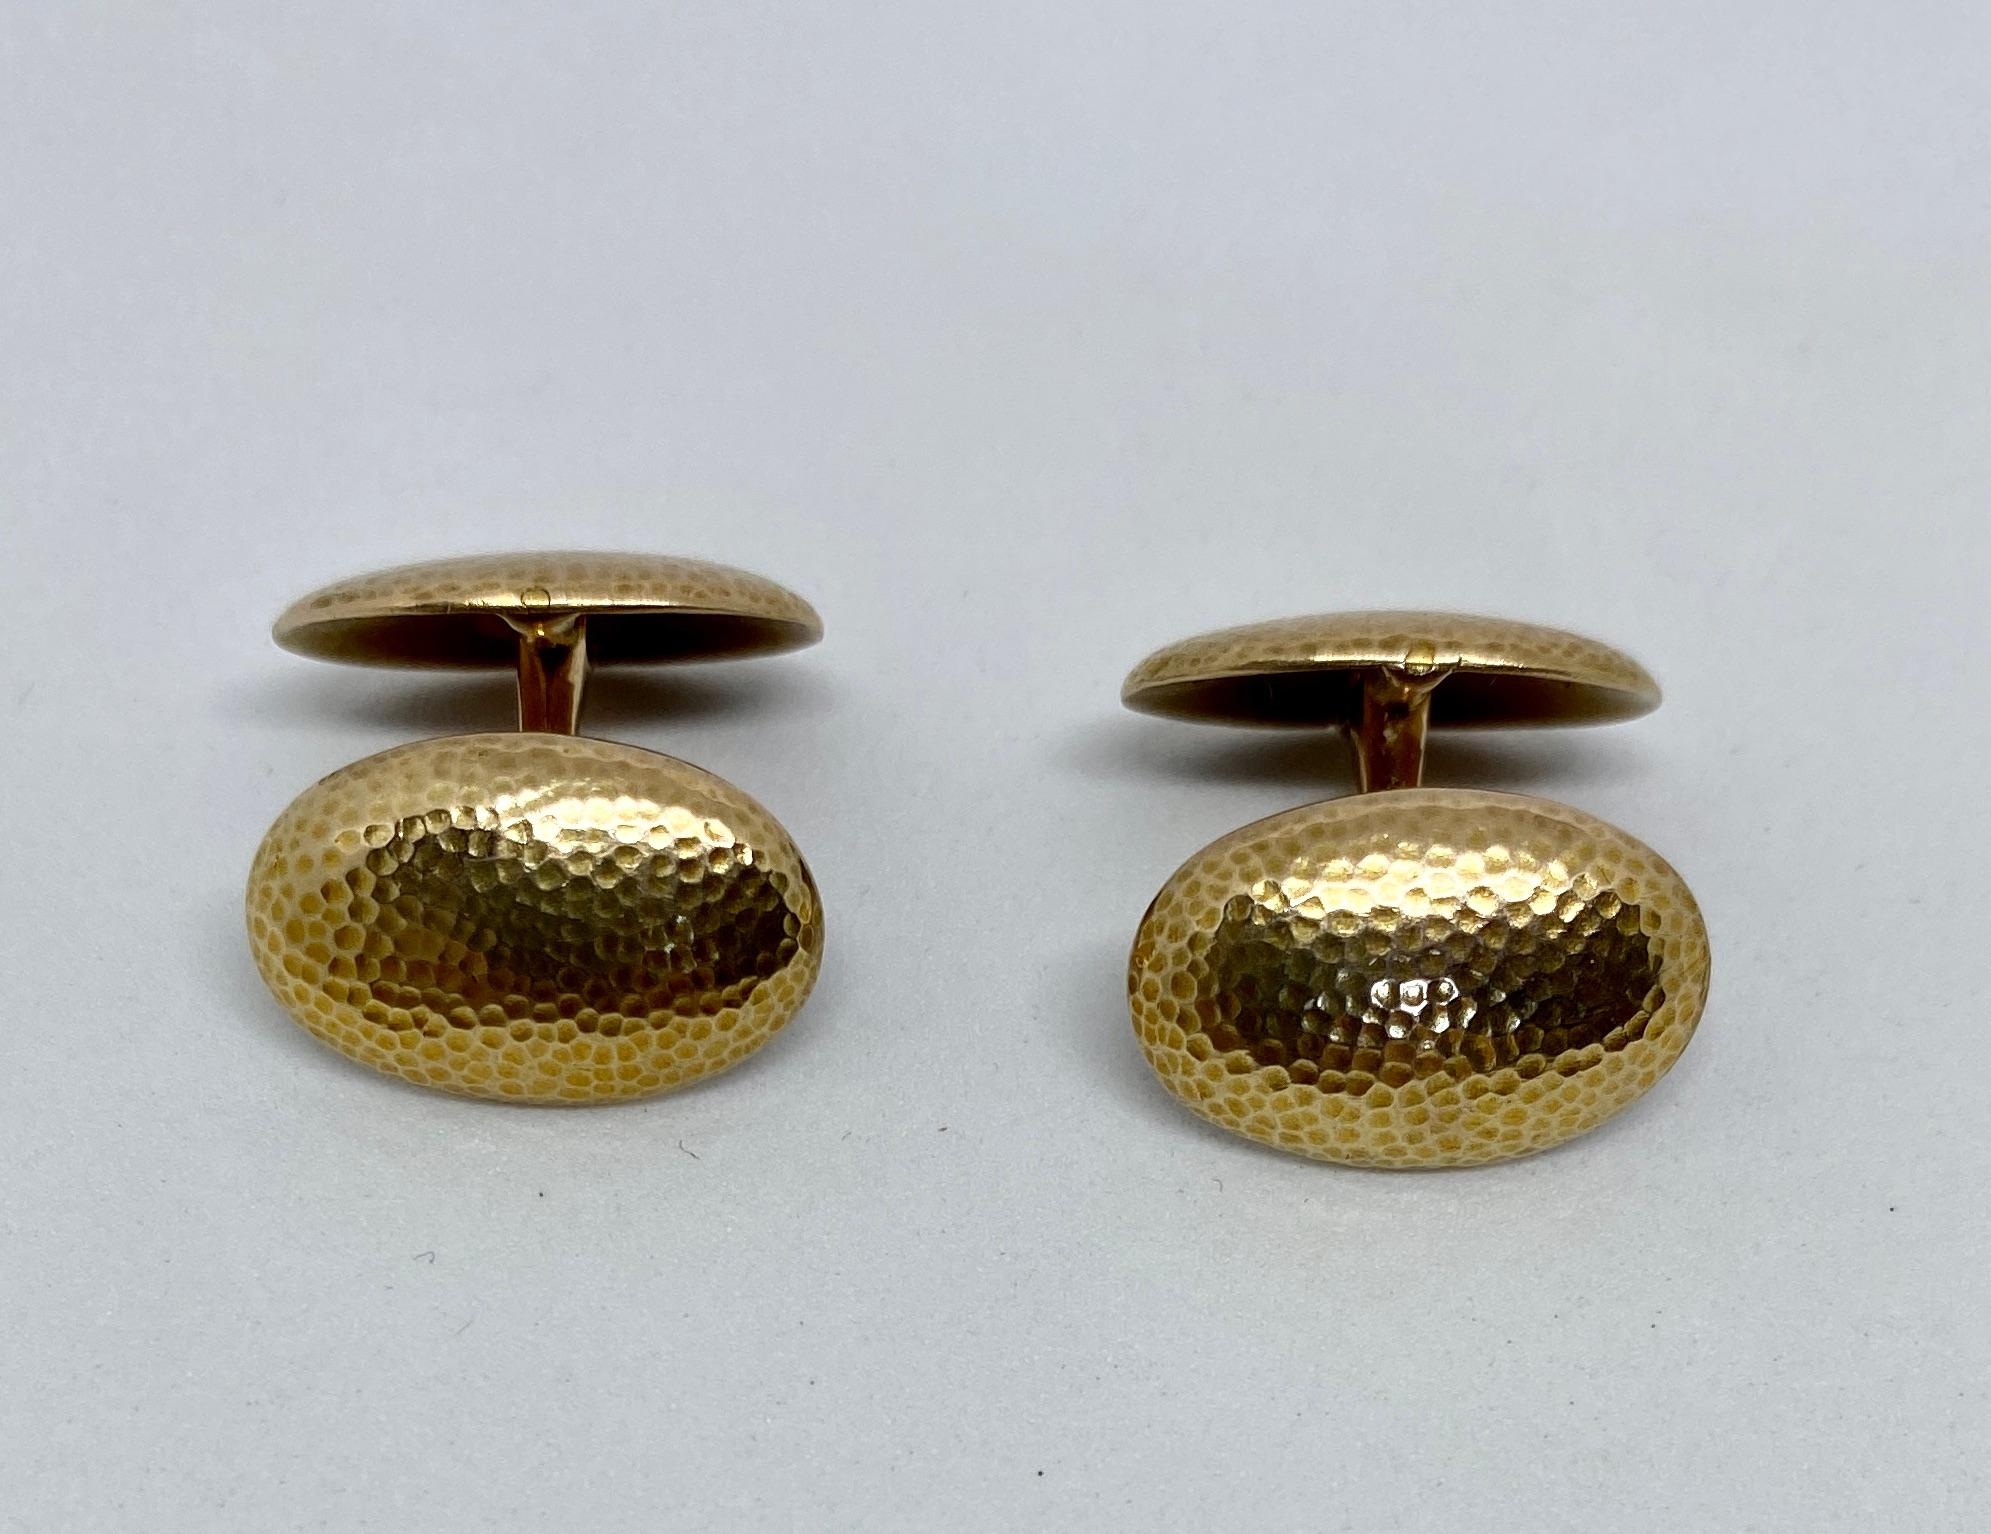 Beautiful hammered gold cufflinks in solid yellow gold with hinged backs.

These cufflinks bear a Continental maker's mark and 585 indicating solid, 14K gold. The four oval faces measure 18.5 by 11.8mm. Together the pair weighs a substantial 13.61